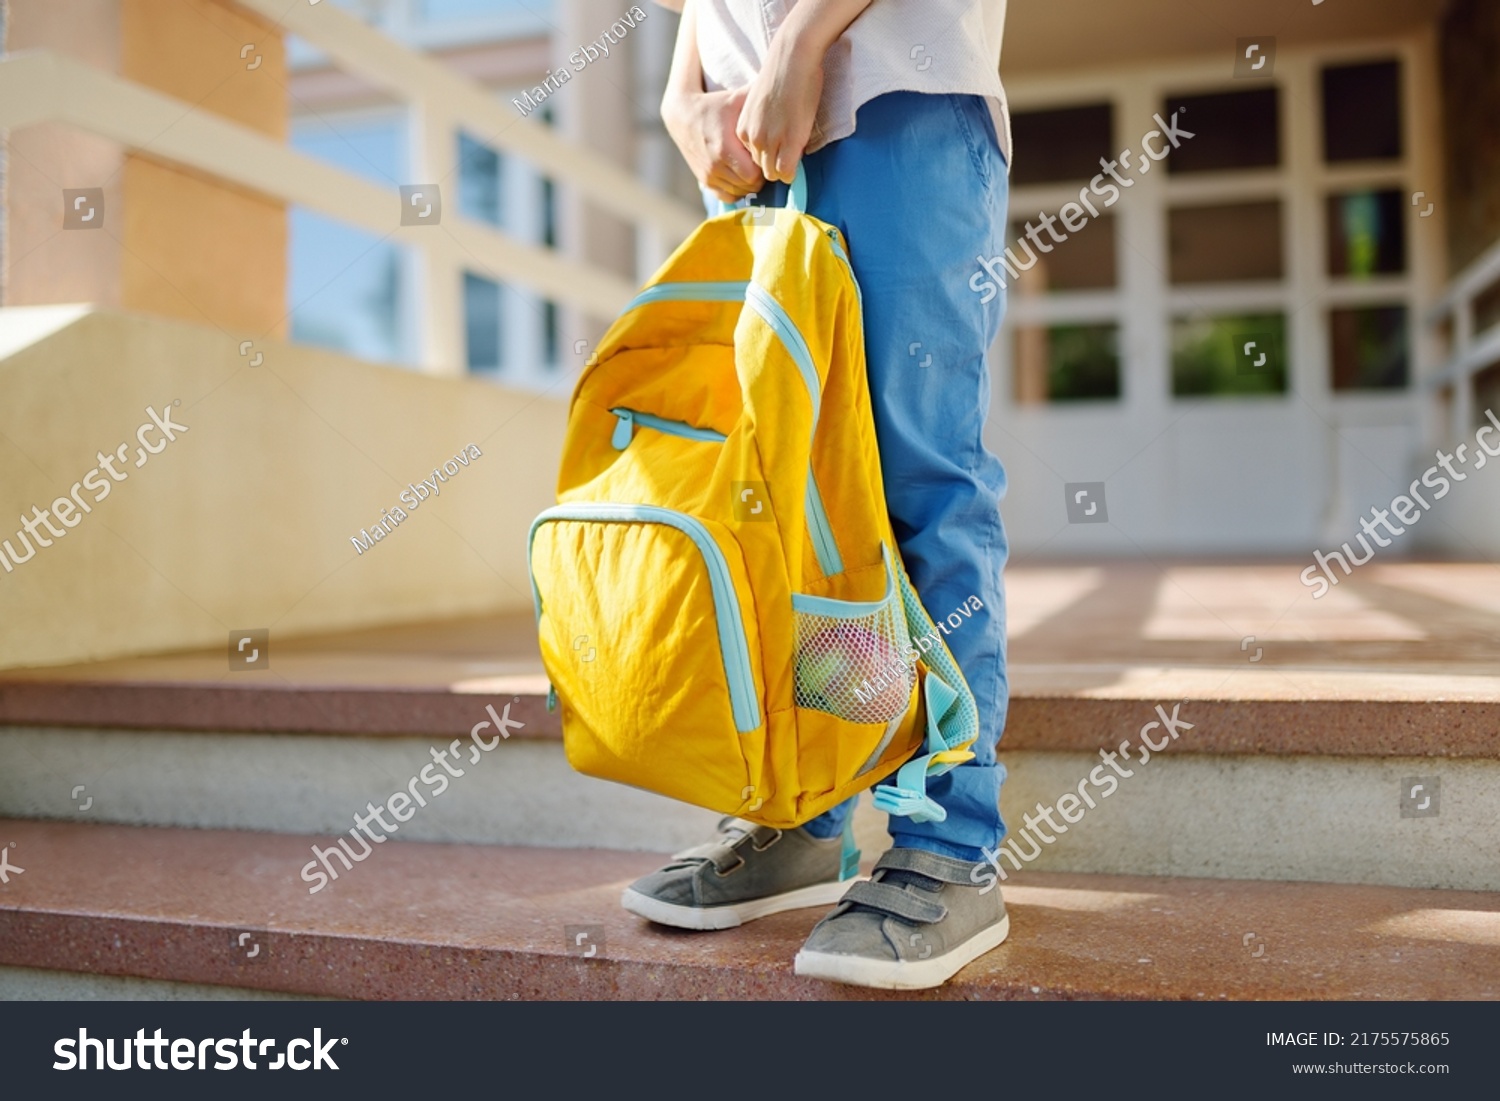 Little student with a backpack on the steps of the stairs of school building. Close-up of child legs, hands and schoolbag of boy standing on staircase of schoolhouse. Kids back to school concept. #2175575865